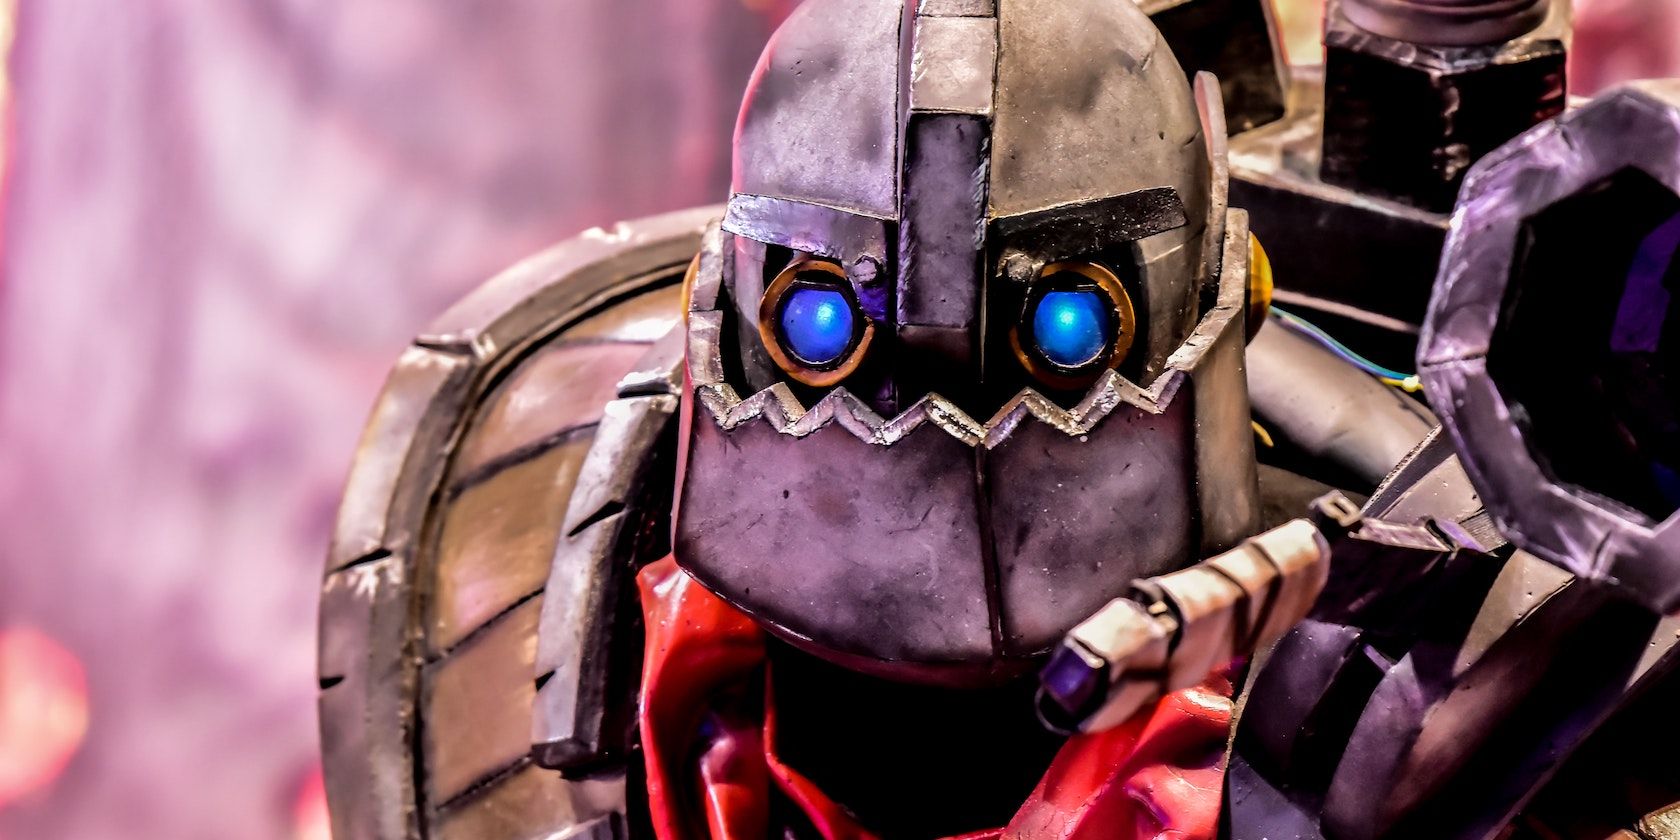 A close up shot of an armoured cosplay with glowing blue eyes